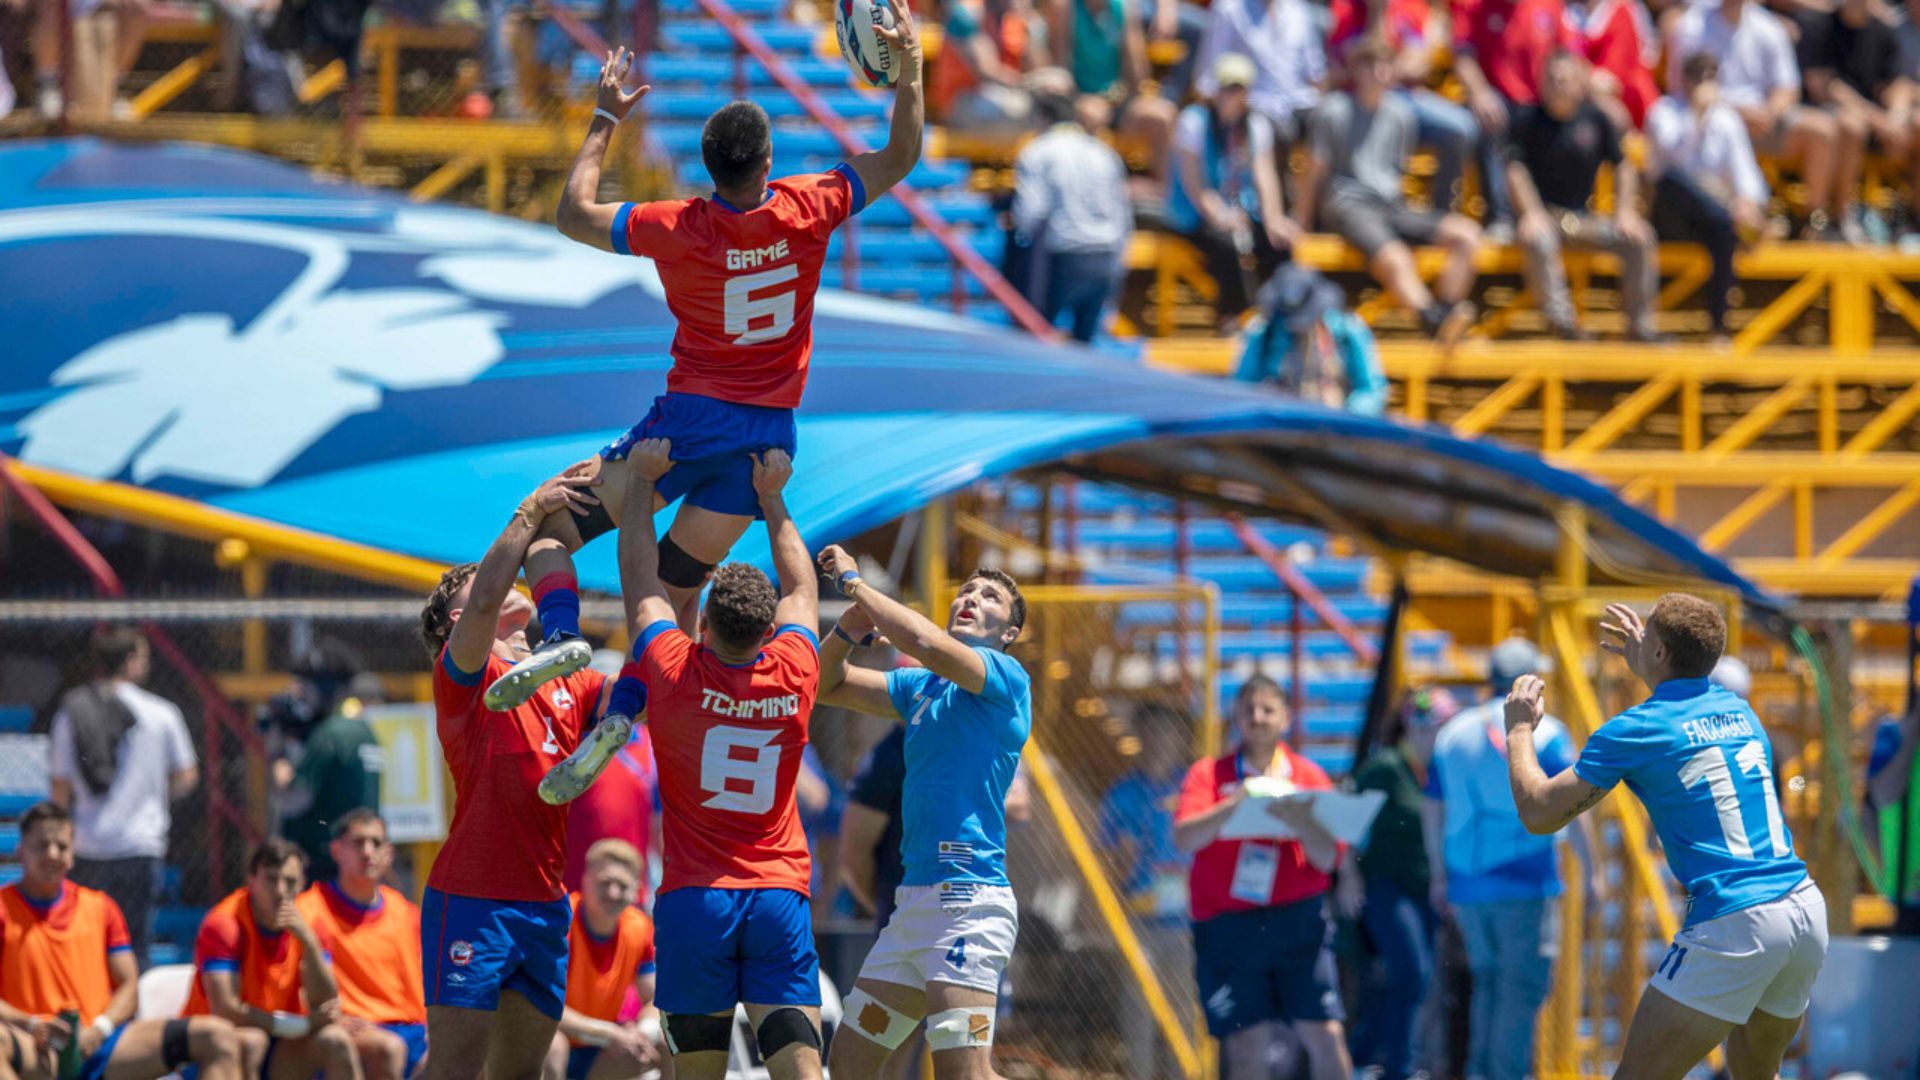 Chile Wins a Thrilling "Final" Against Uruguay in Rugby 7 at Santiago 2023